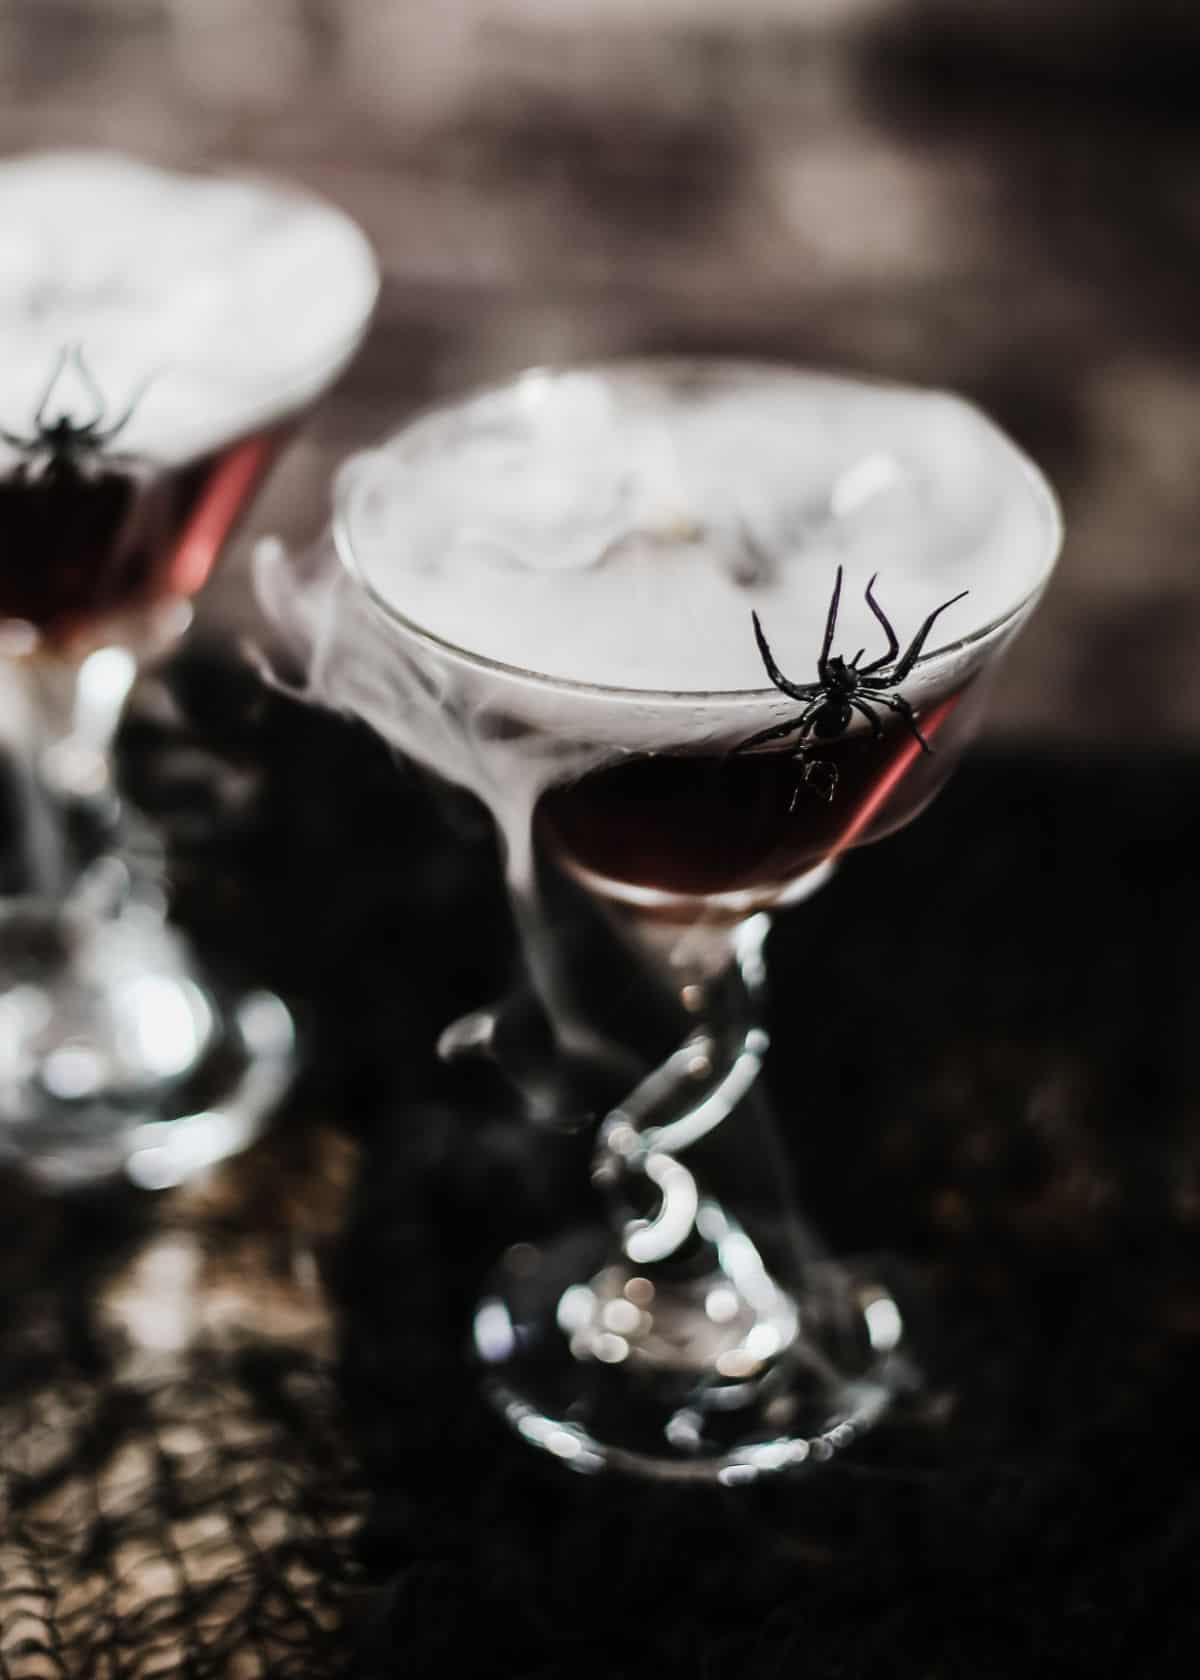 Serve this Halloween Cocktail Black Widow Martini, for your grown up party only! Sip slowly or it might sneak up and bite you!